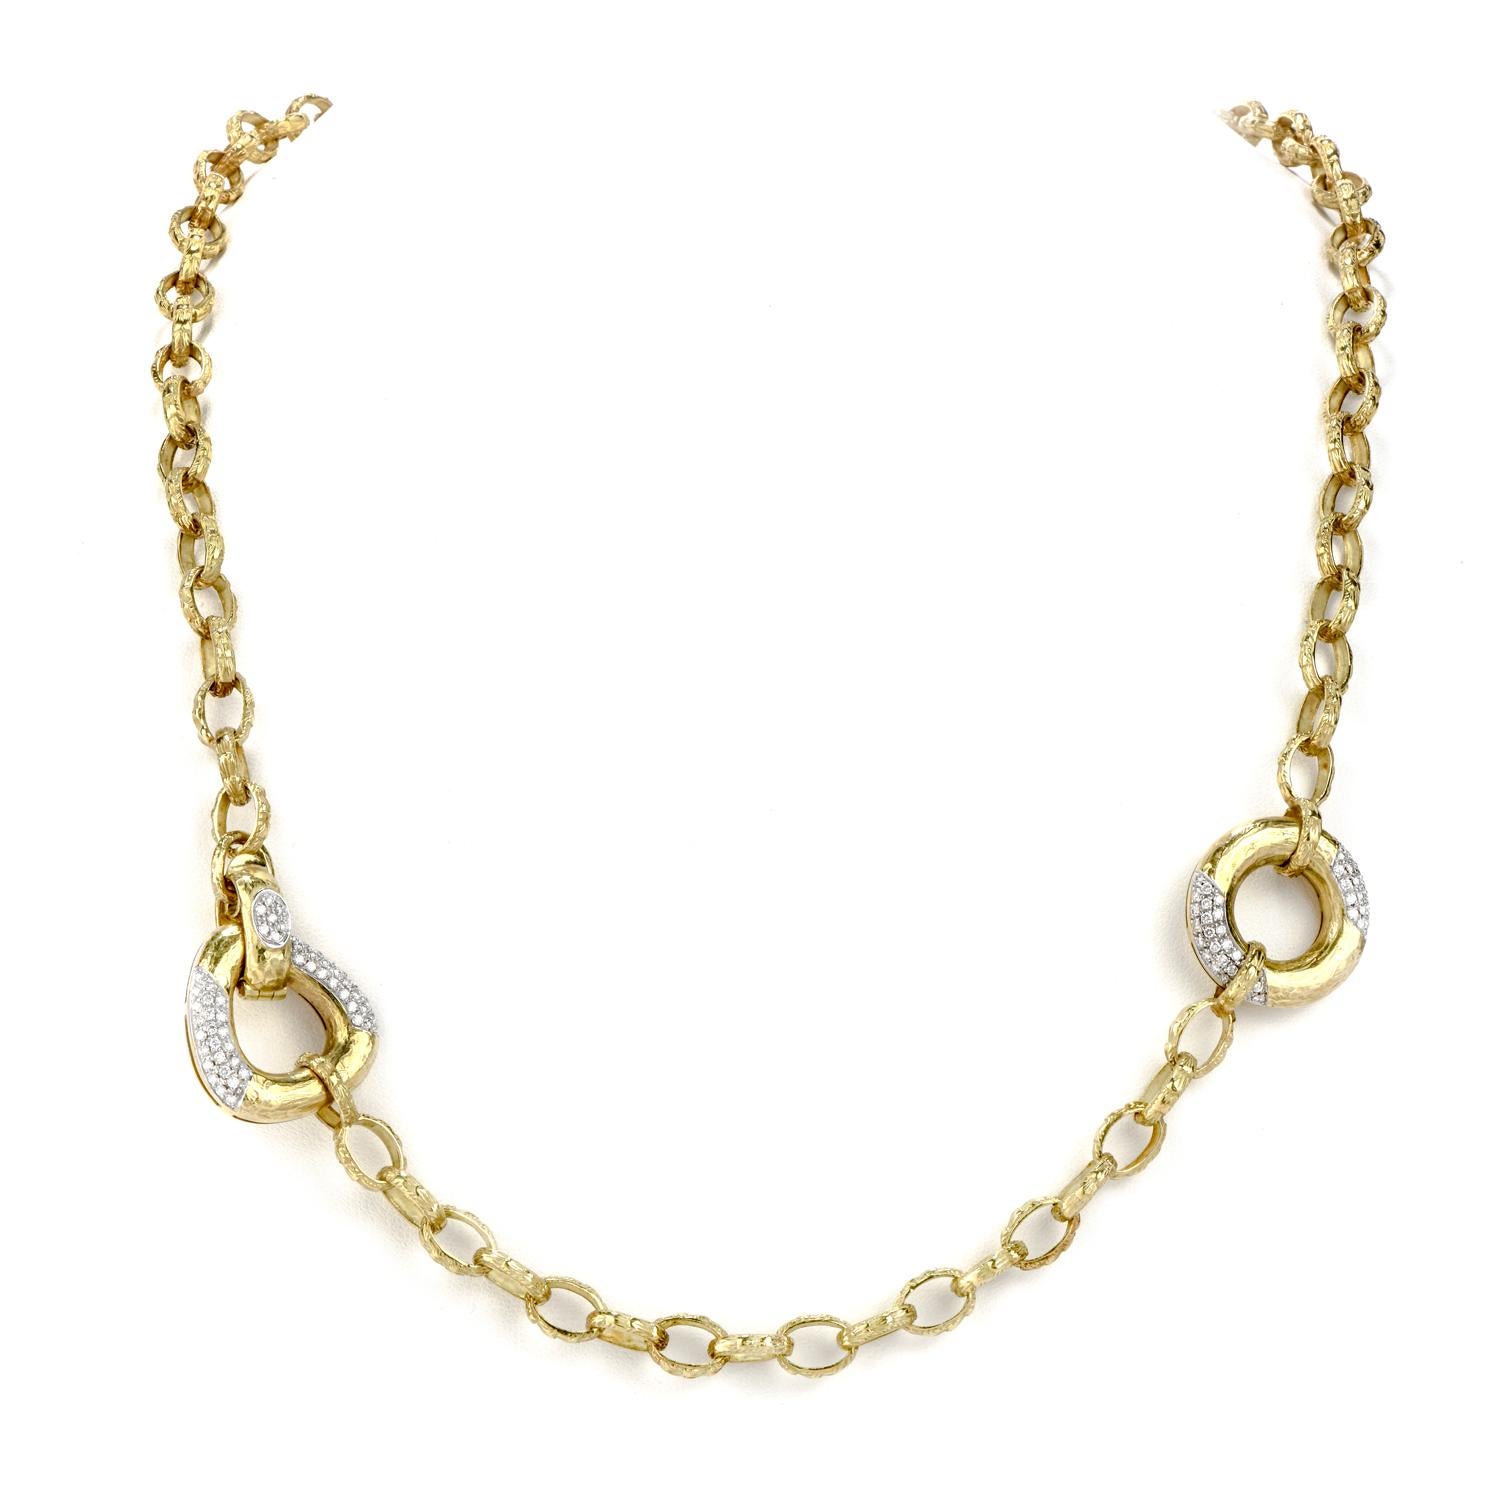 Decorate your outfit with ease with this Estate Diamond 18K Yellow Gold 32-Inch Long Textured Necklace. 

This 82.5-gram necklace has approximately 113 round cut genuine diamonds of 1.30 carats, G-H color and VS clarity. 

They are set in one round,